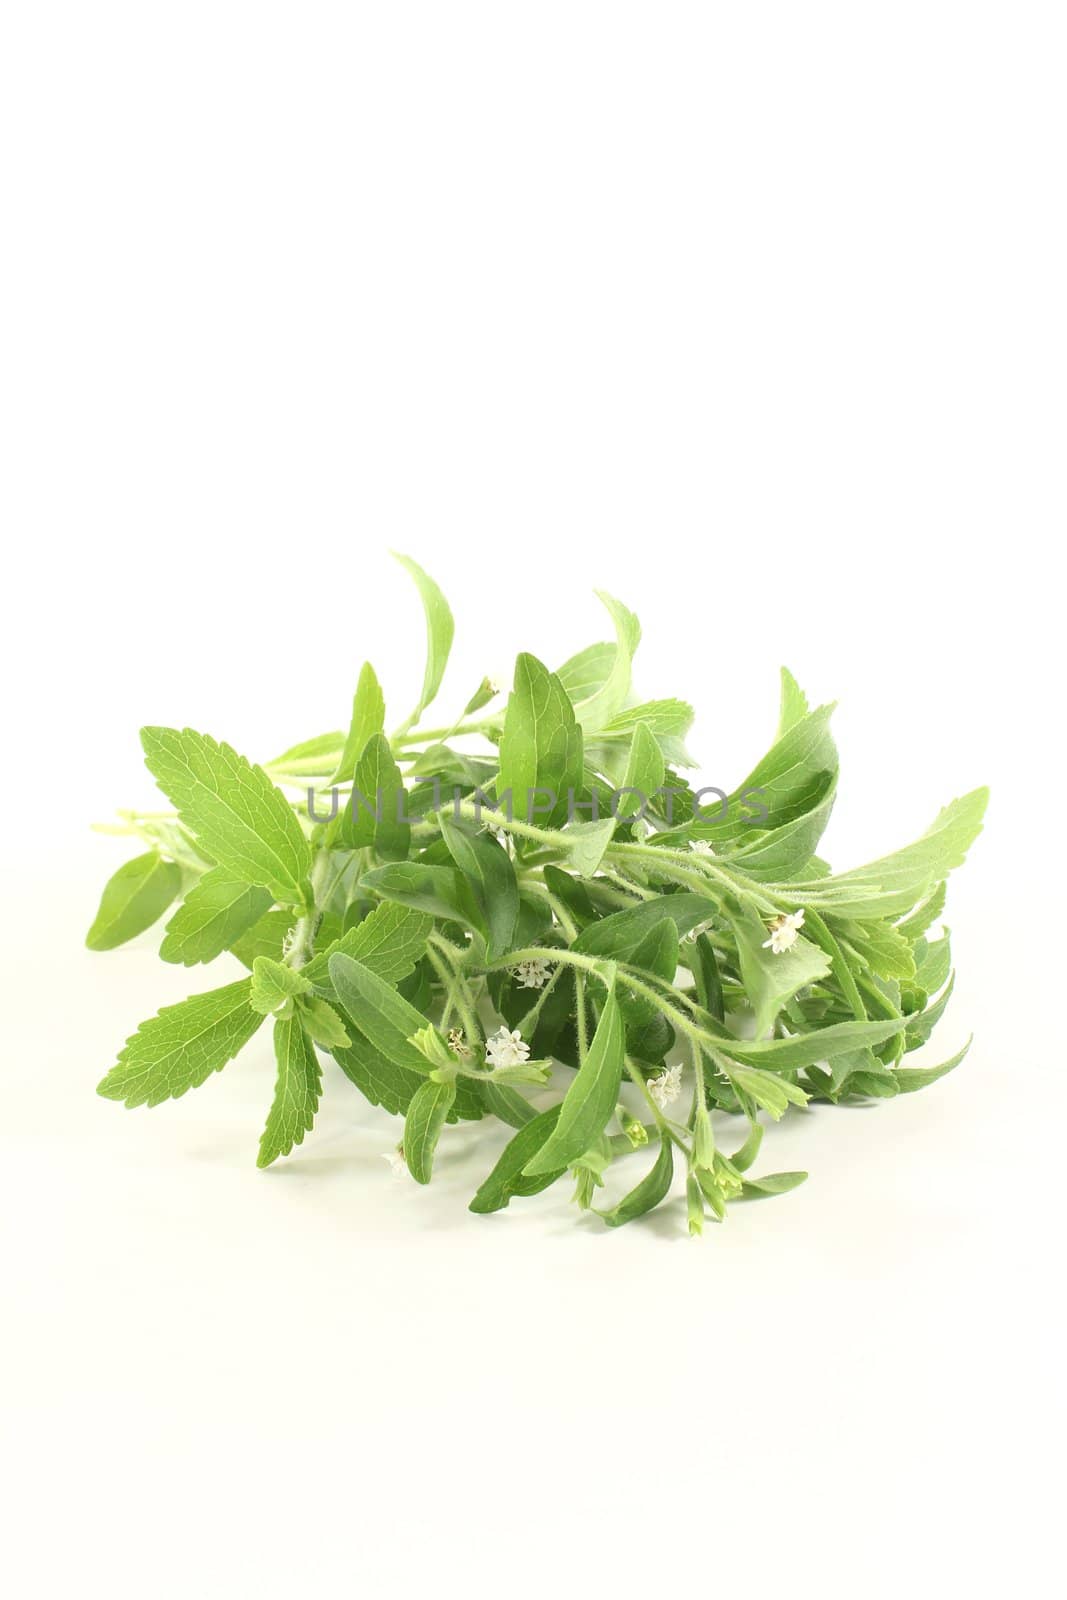 green Stevia with white flowers on a light background